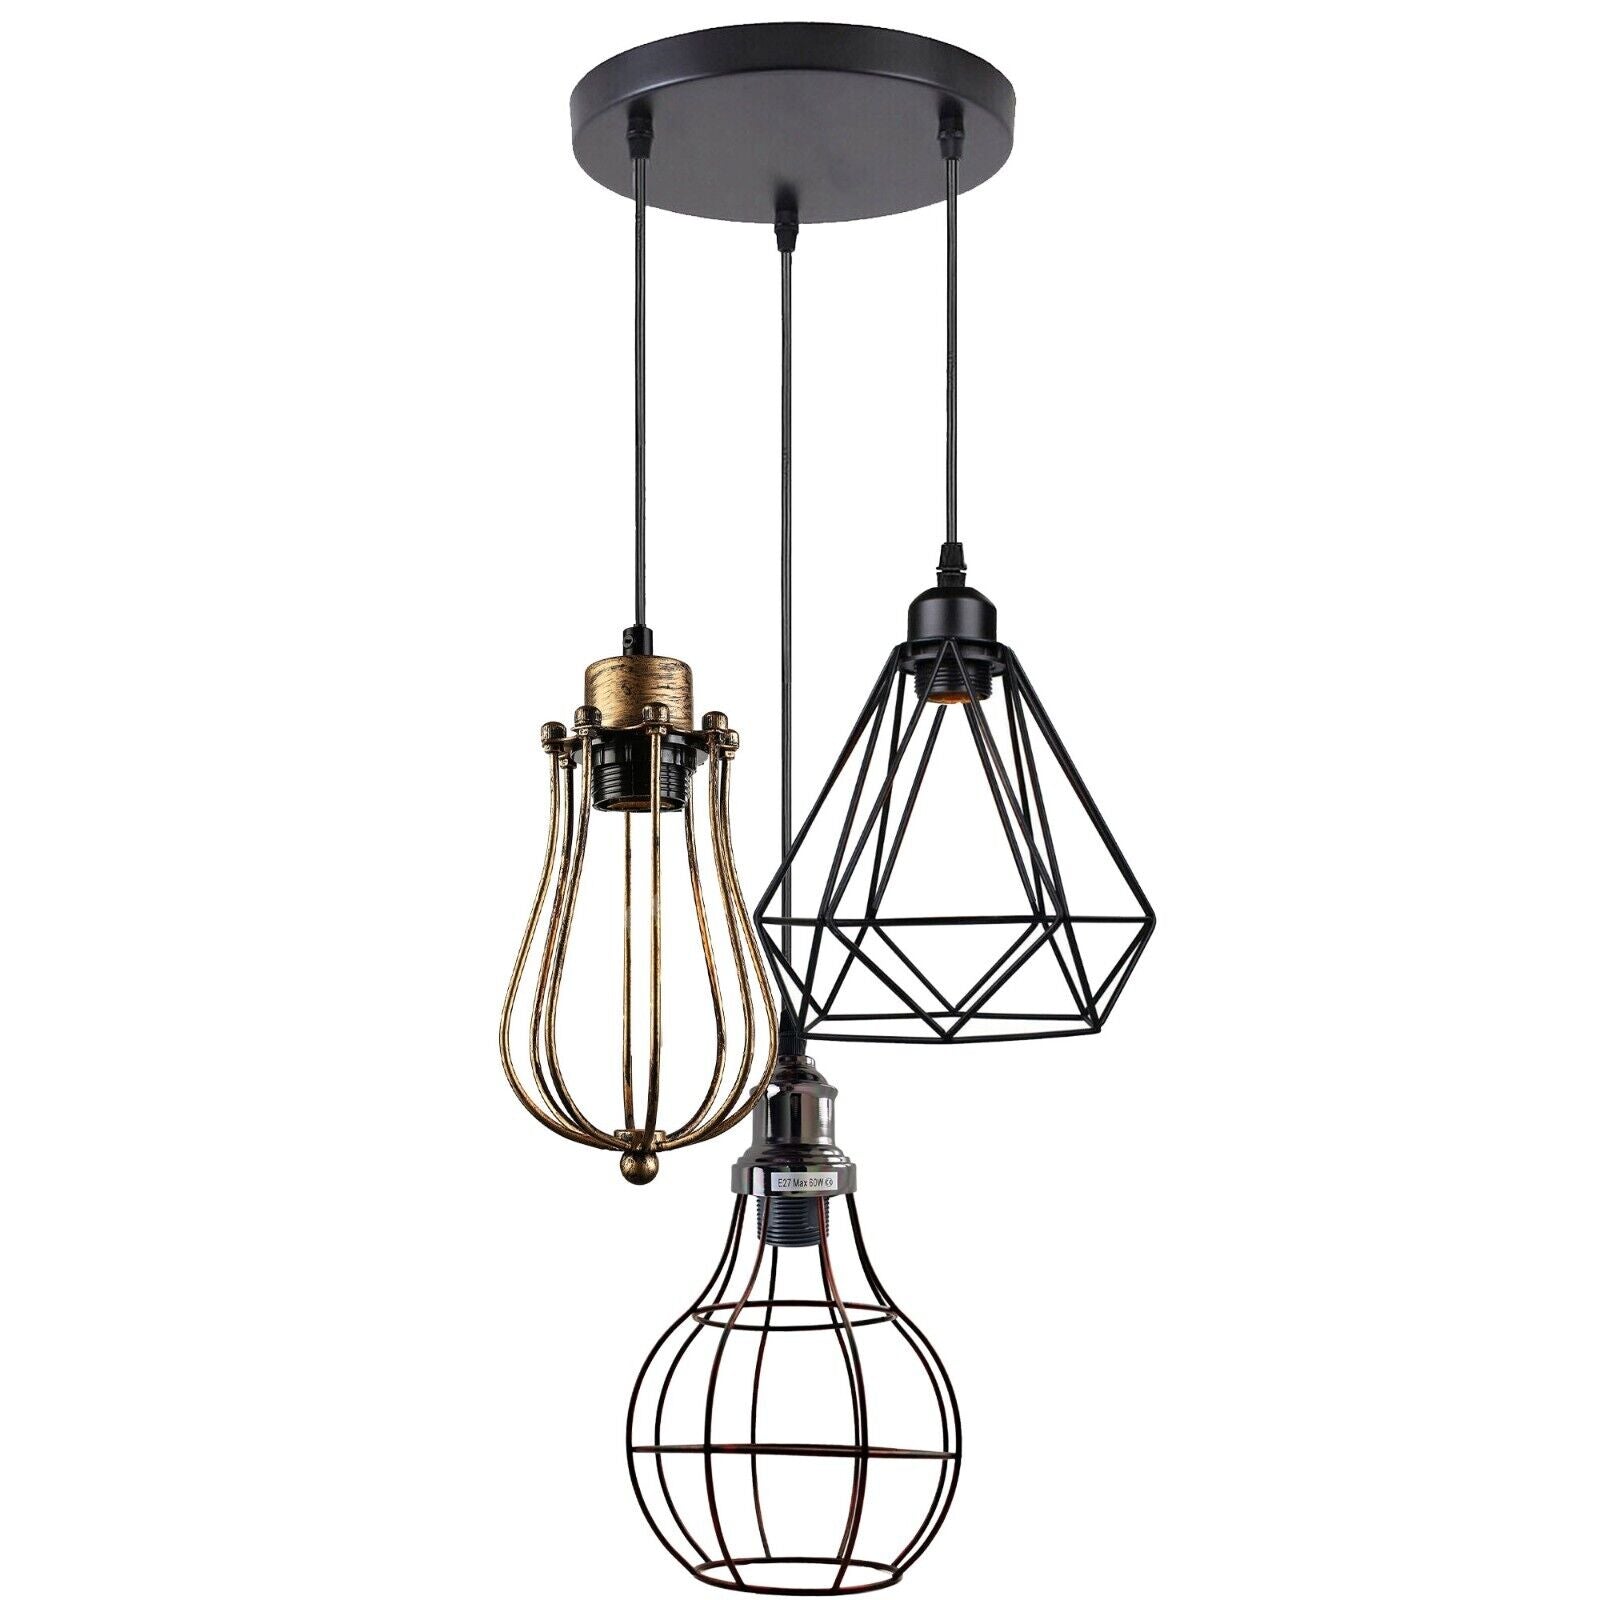 Light Cage Ceiling Hanging Pendant Lamp